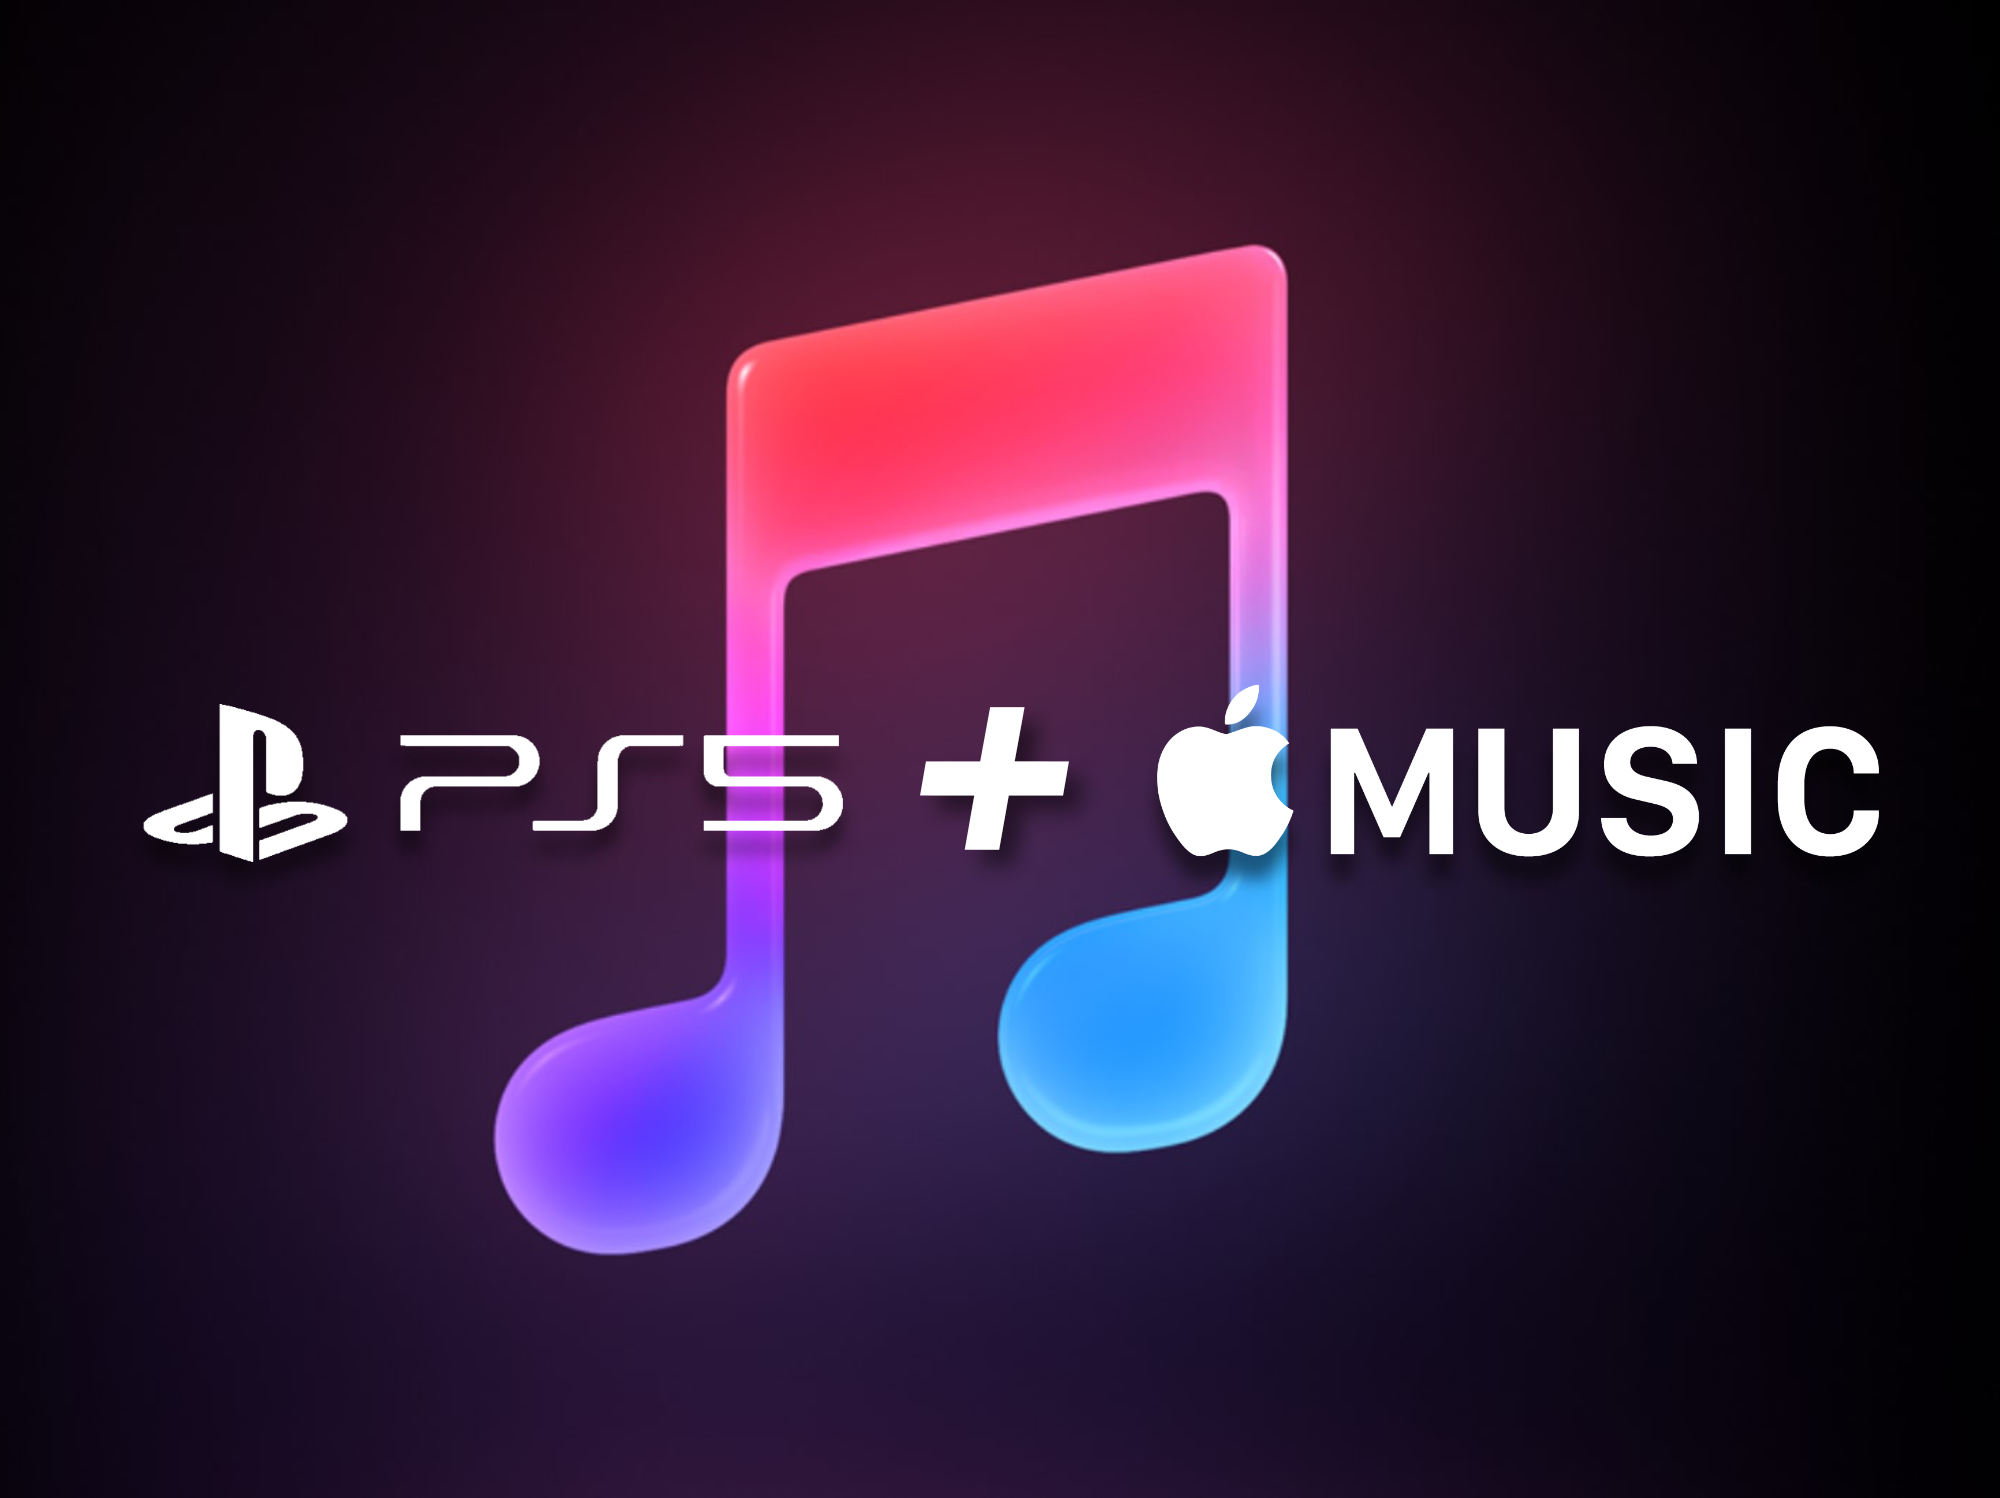 Apple Music may be joining Spotify on PlayStation 5 soon